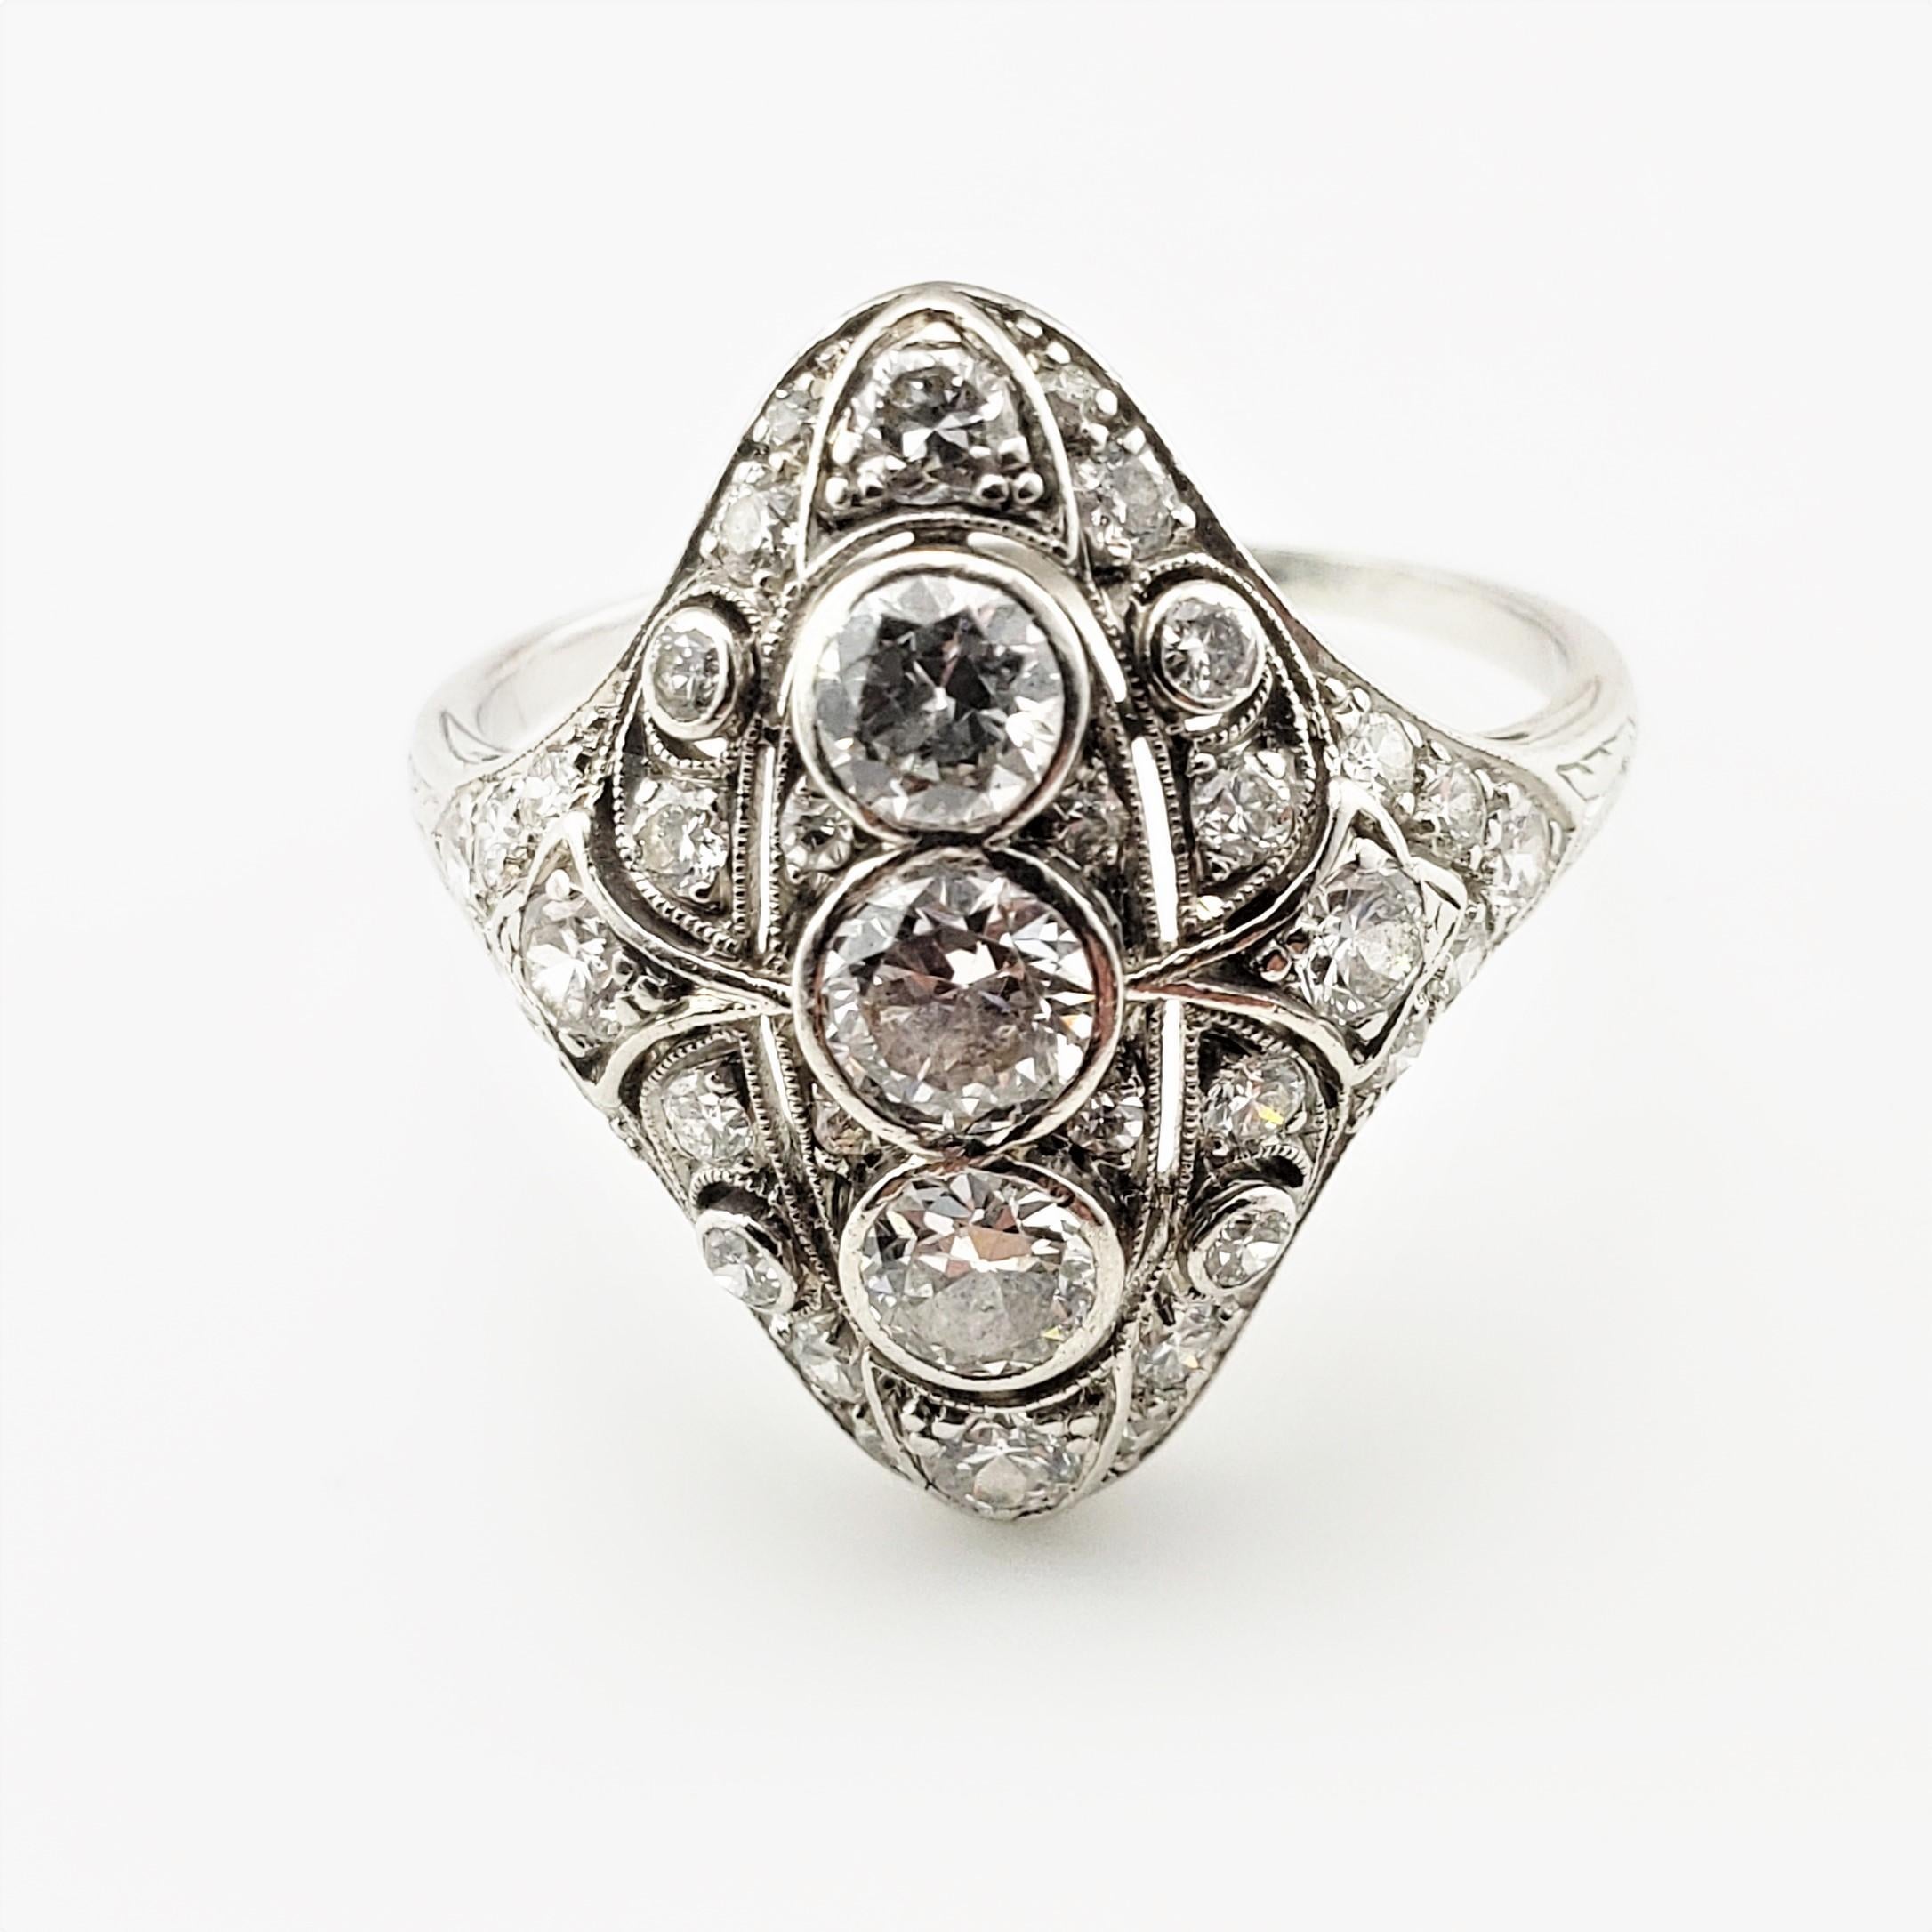 Vintage Platinum and Diamond Filigree Ring Size 9.5 GAI Certified-

This stunning ring features 33 round brilliant cut diamonds set in exquisitely detailed platinum filigree.  (center stones; .25 ct., .30 ct., .22 ct.).  Top of ring measures 21 mm x